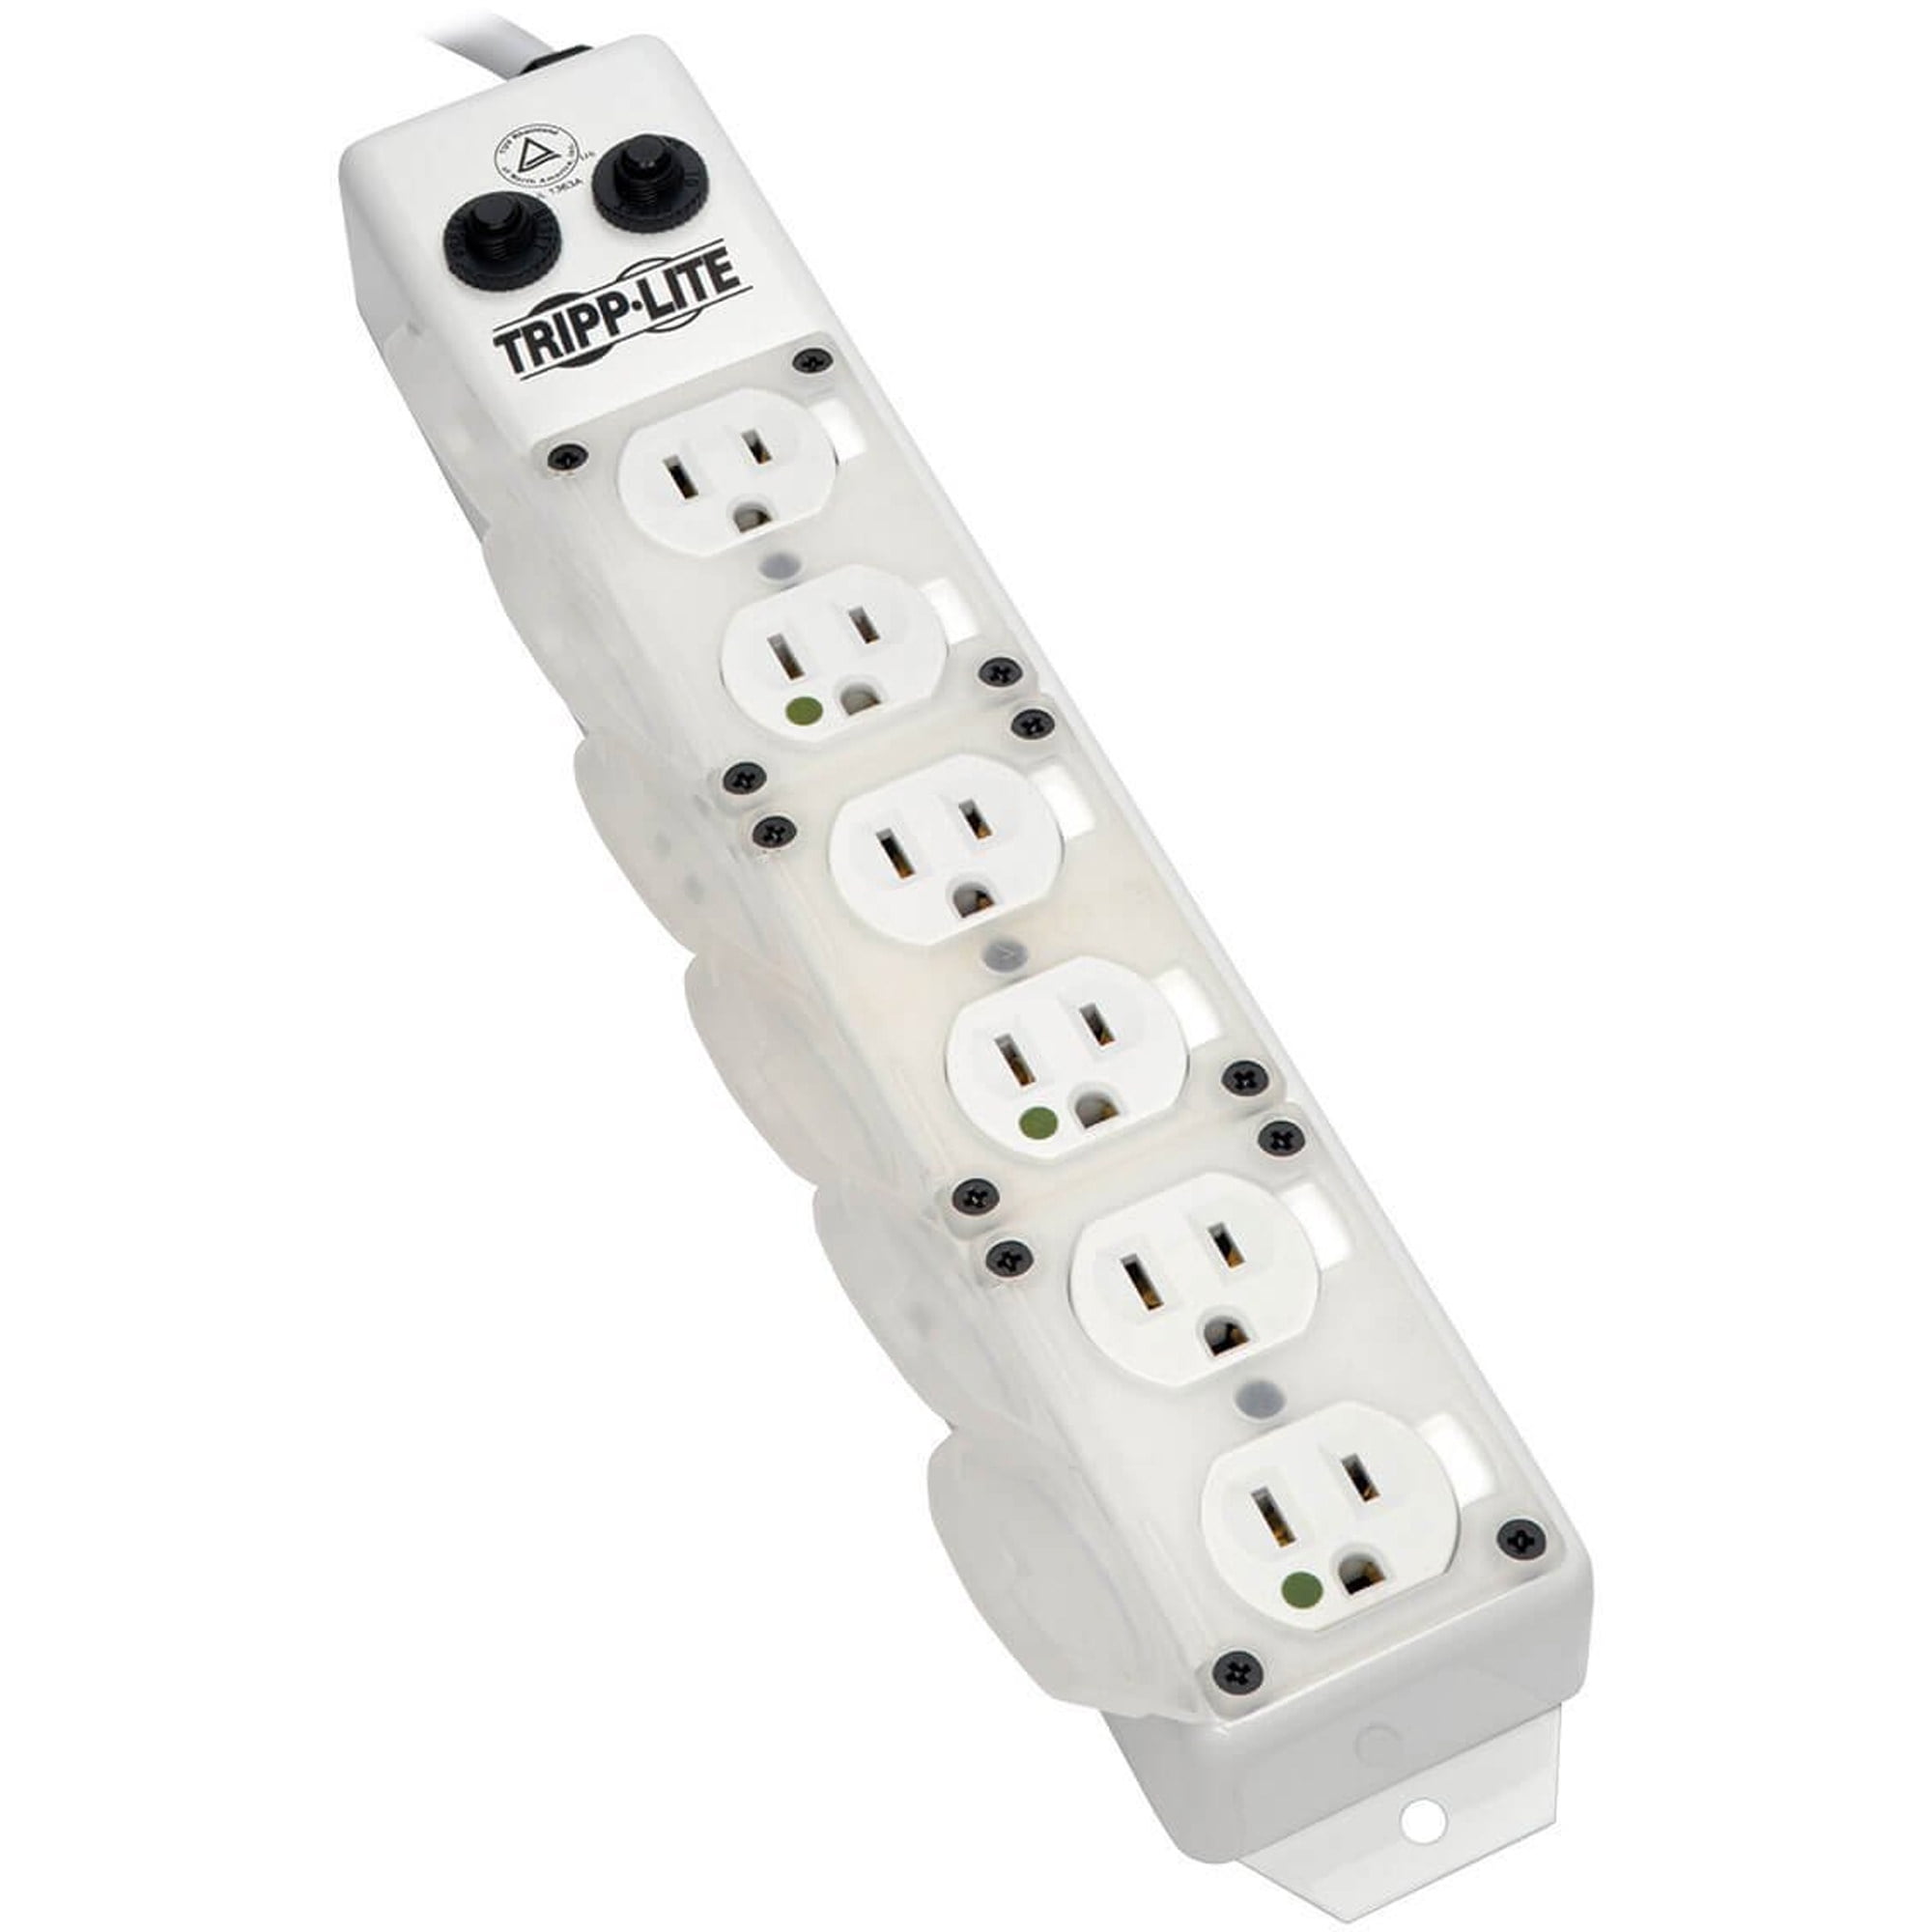 Tripp Lite for Patient-Care Vicinity UL 1363A Medical-Grade Power Strip, 6  15A Hospital-Grade Outlets, Safety Covers, 7 ft. Cord - Walmart.com